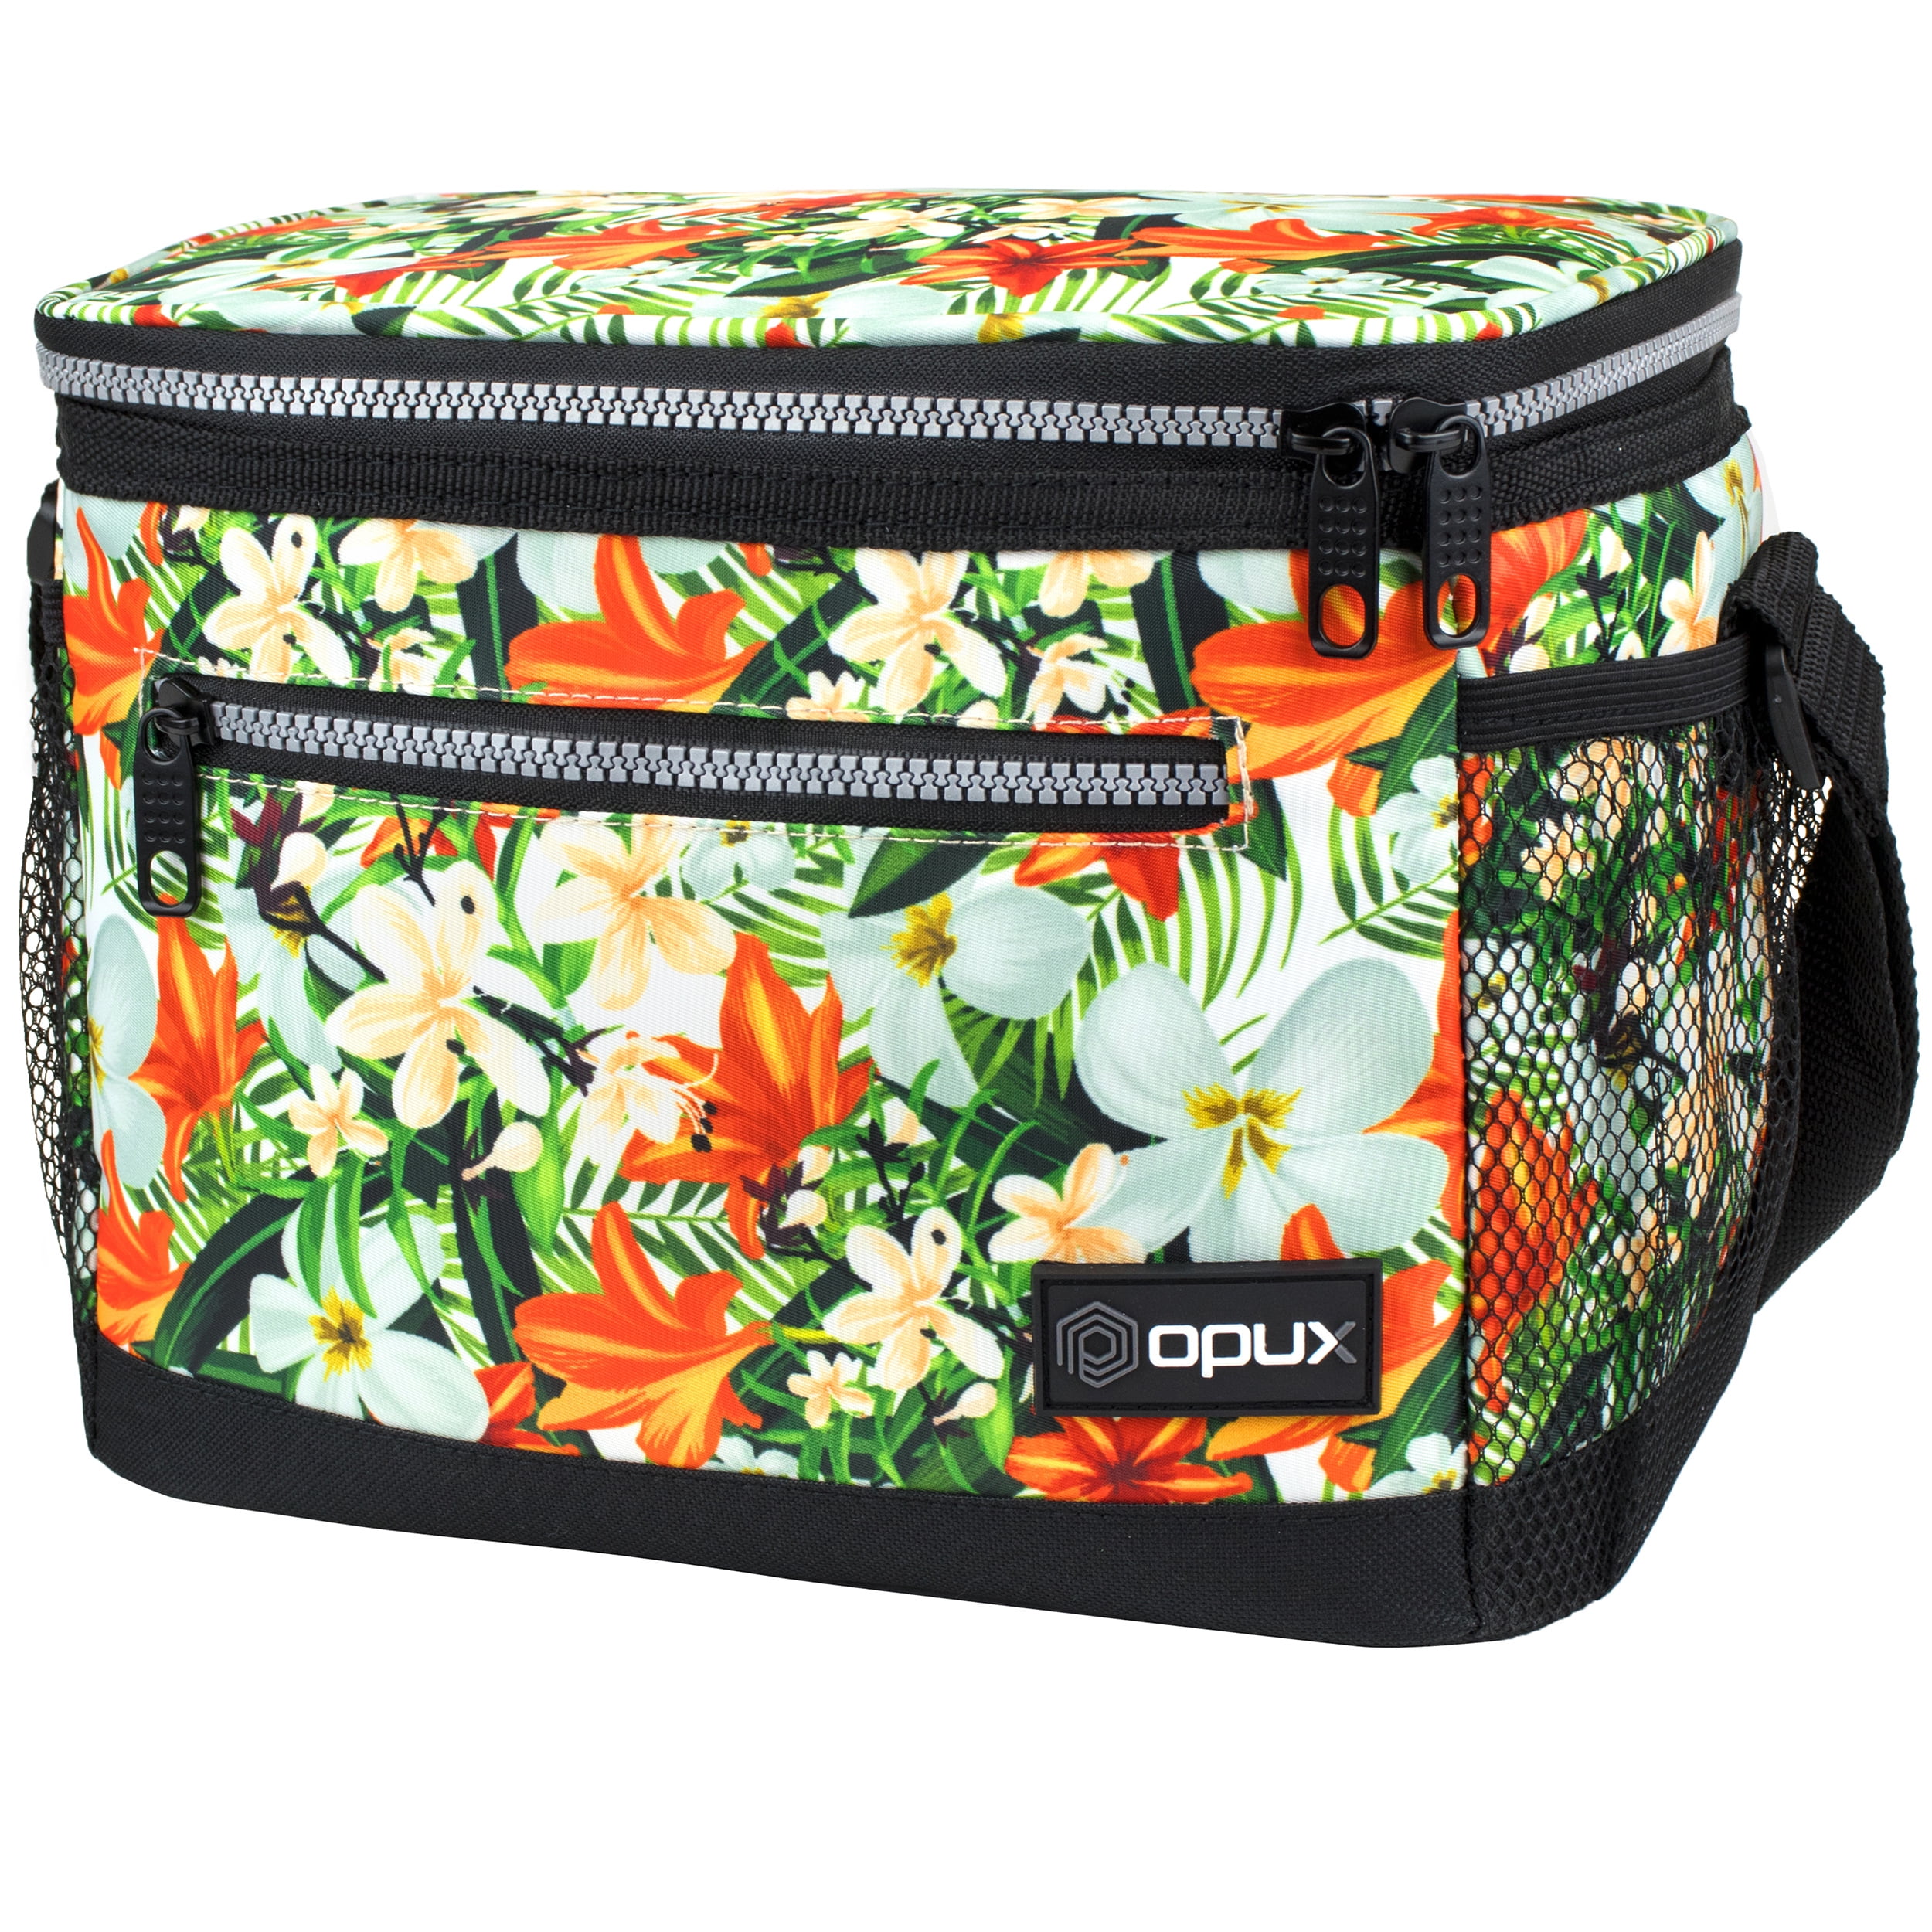 OPUX Insulated Lunch Box Men Women, Lunch Bag for Work School ...